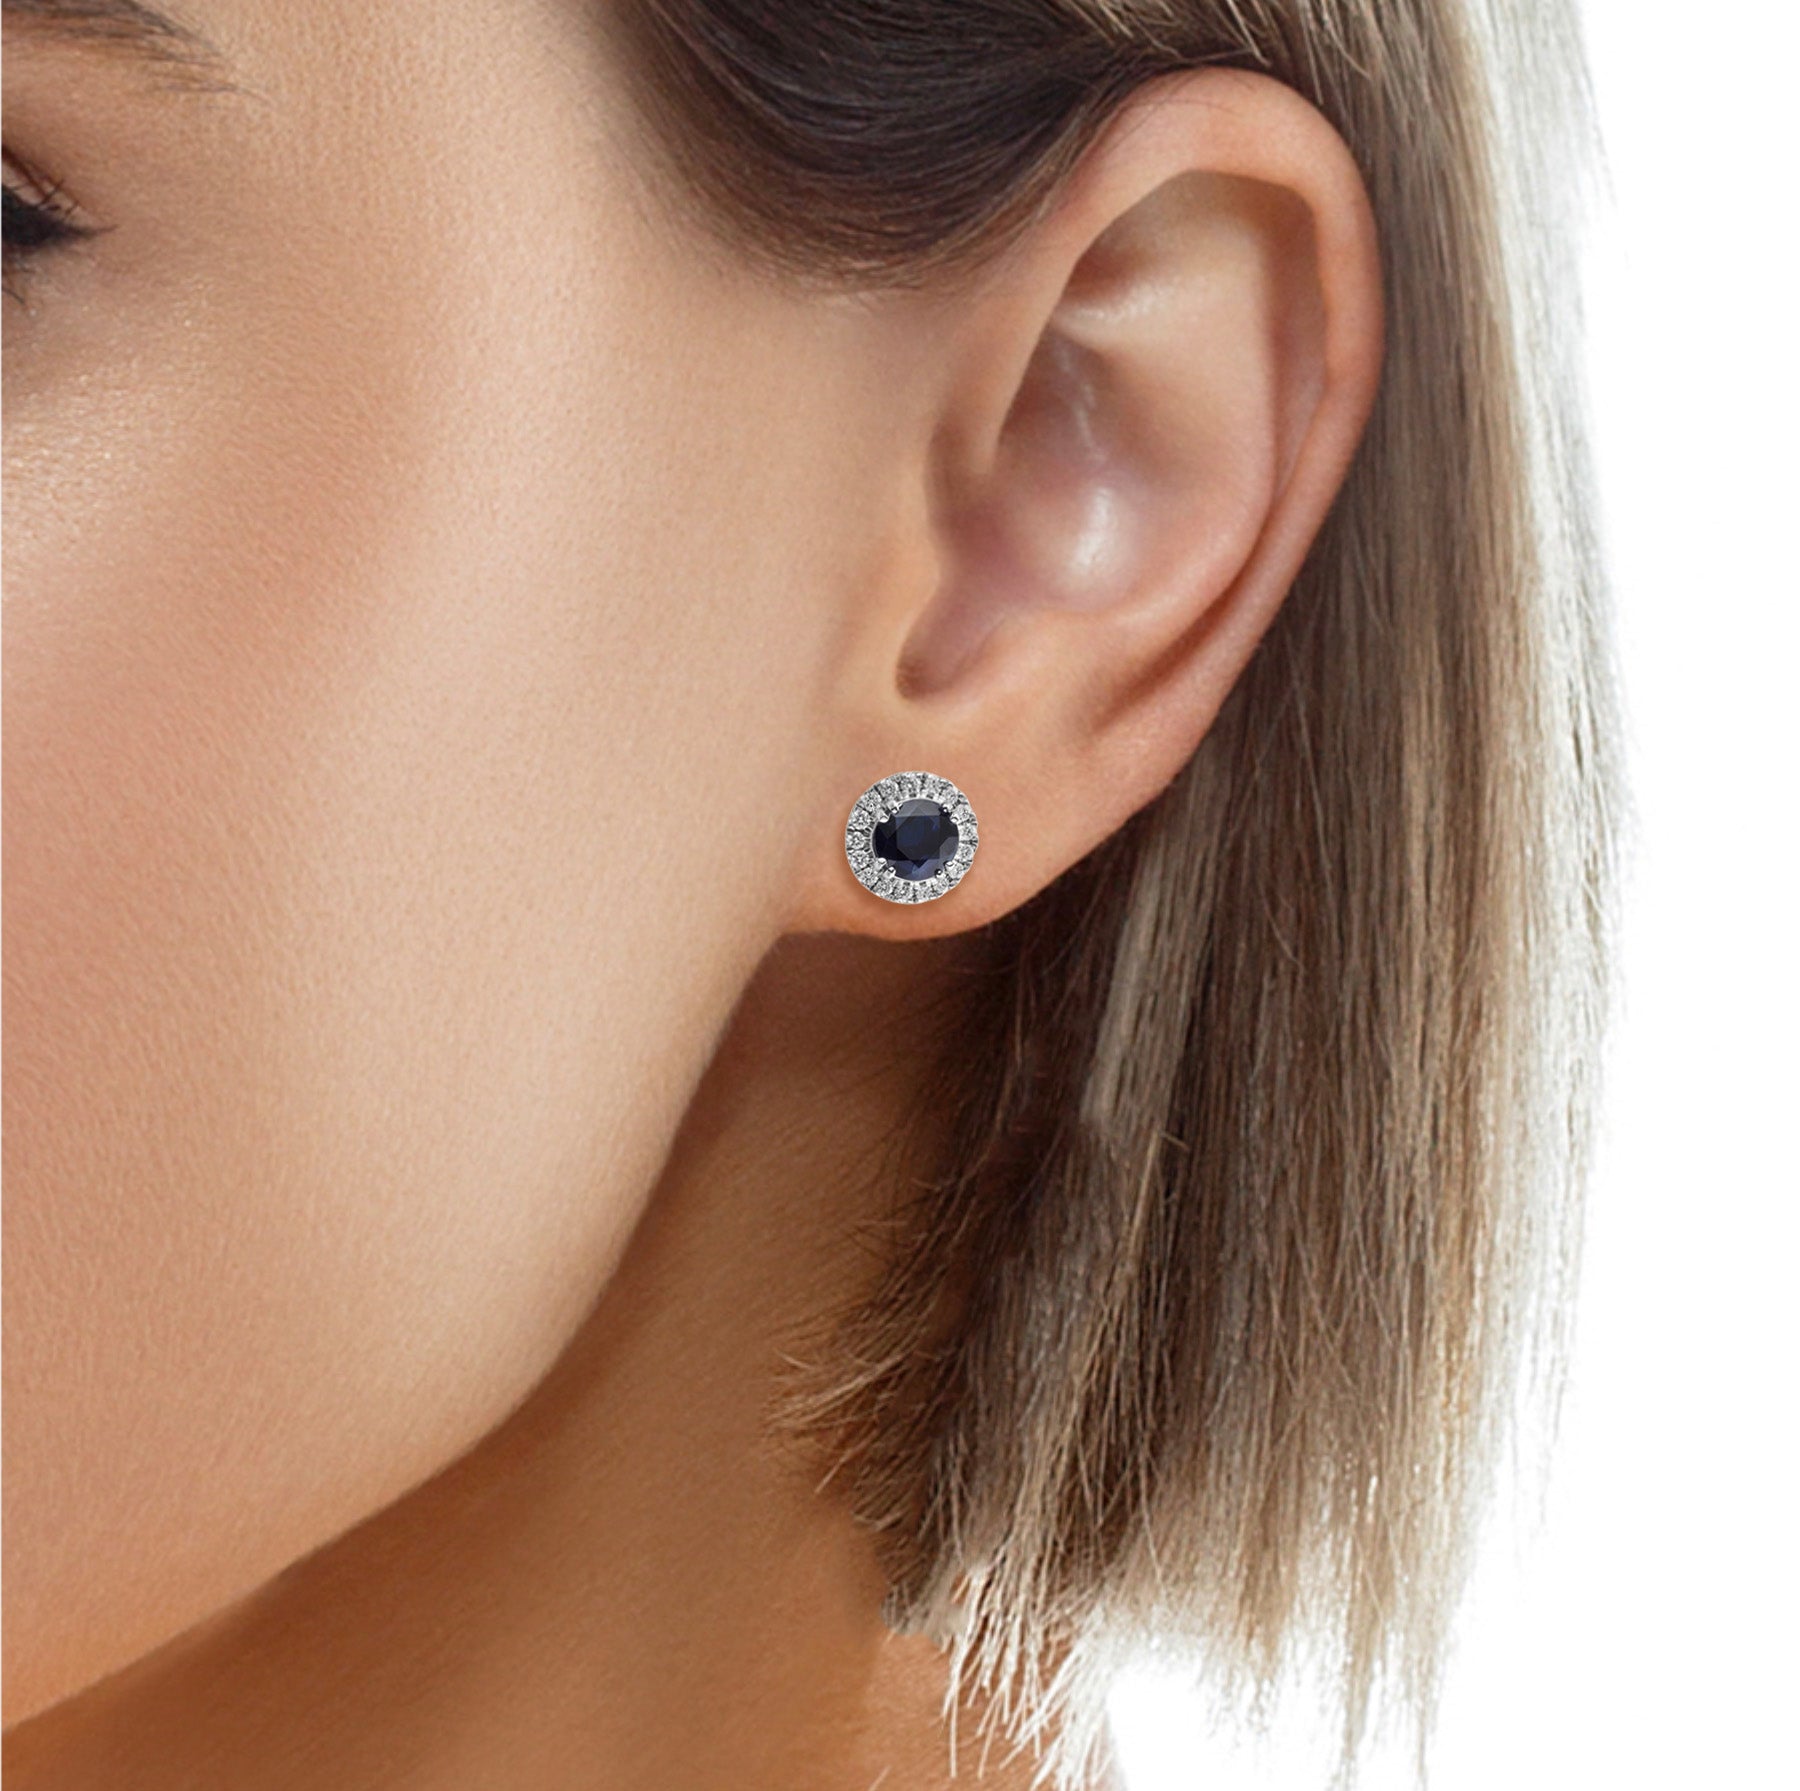 Blue sapphire and diamond halo stud earrings shown worn in the ear